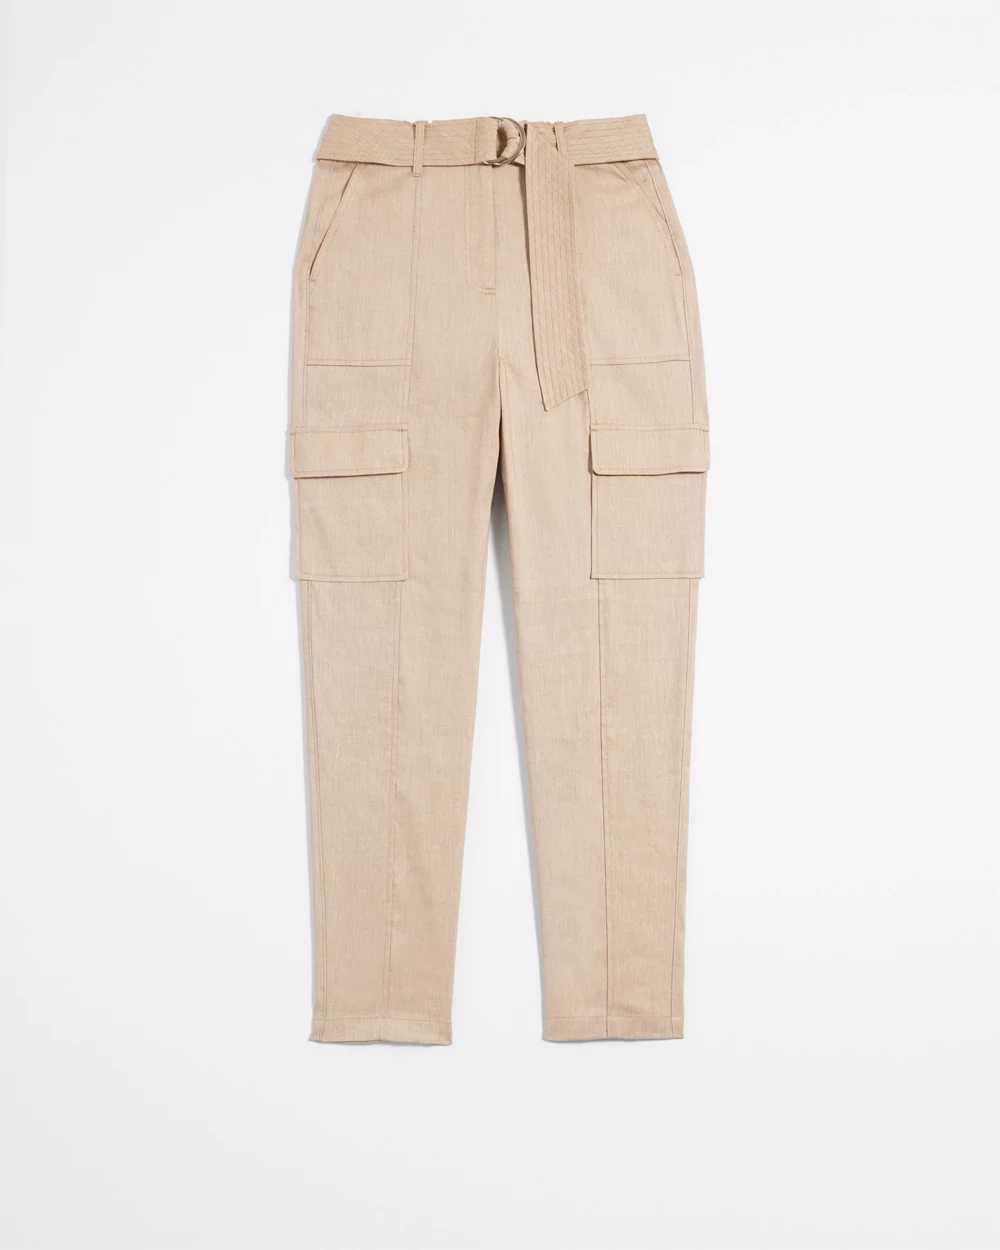 Linen Belted Utility Pant click to view larger image.